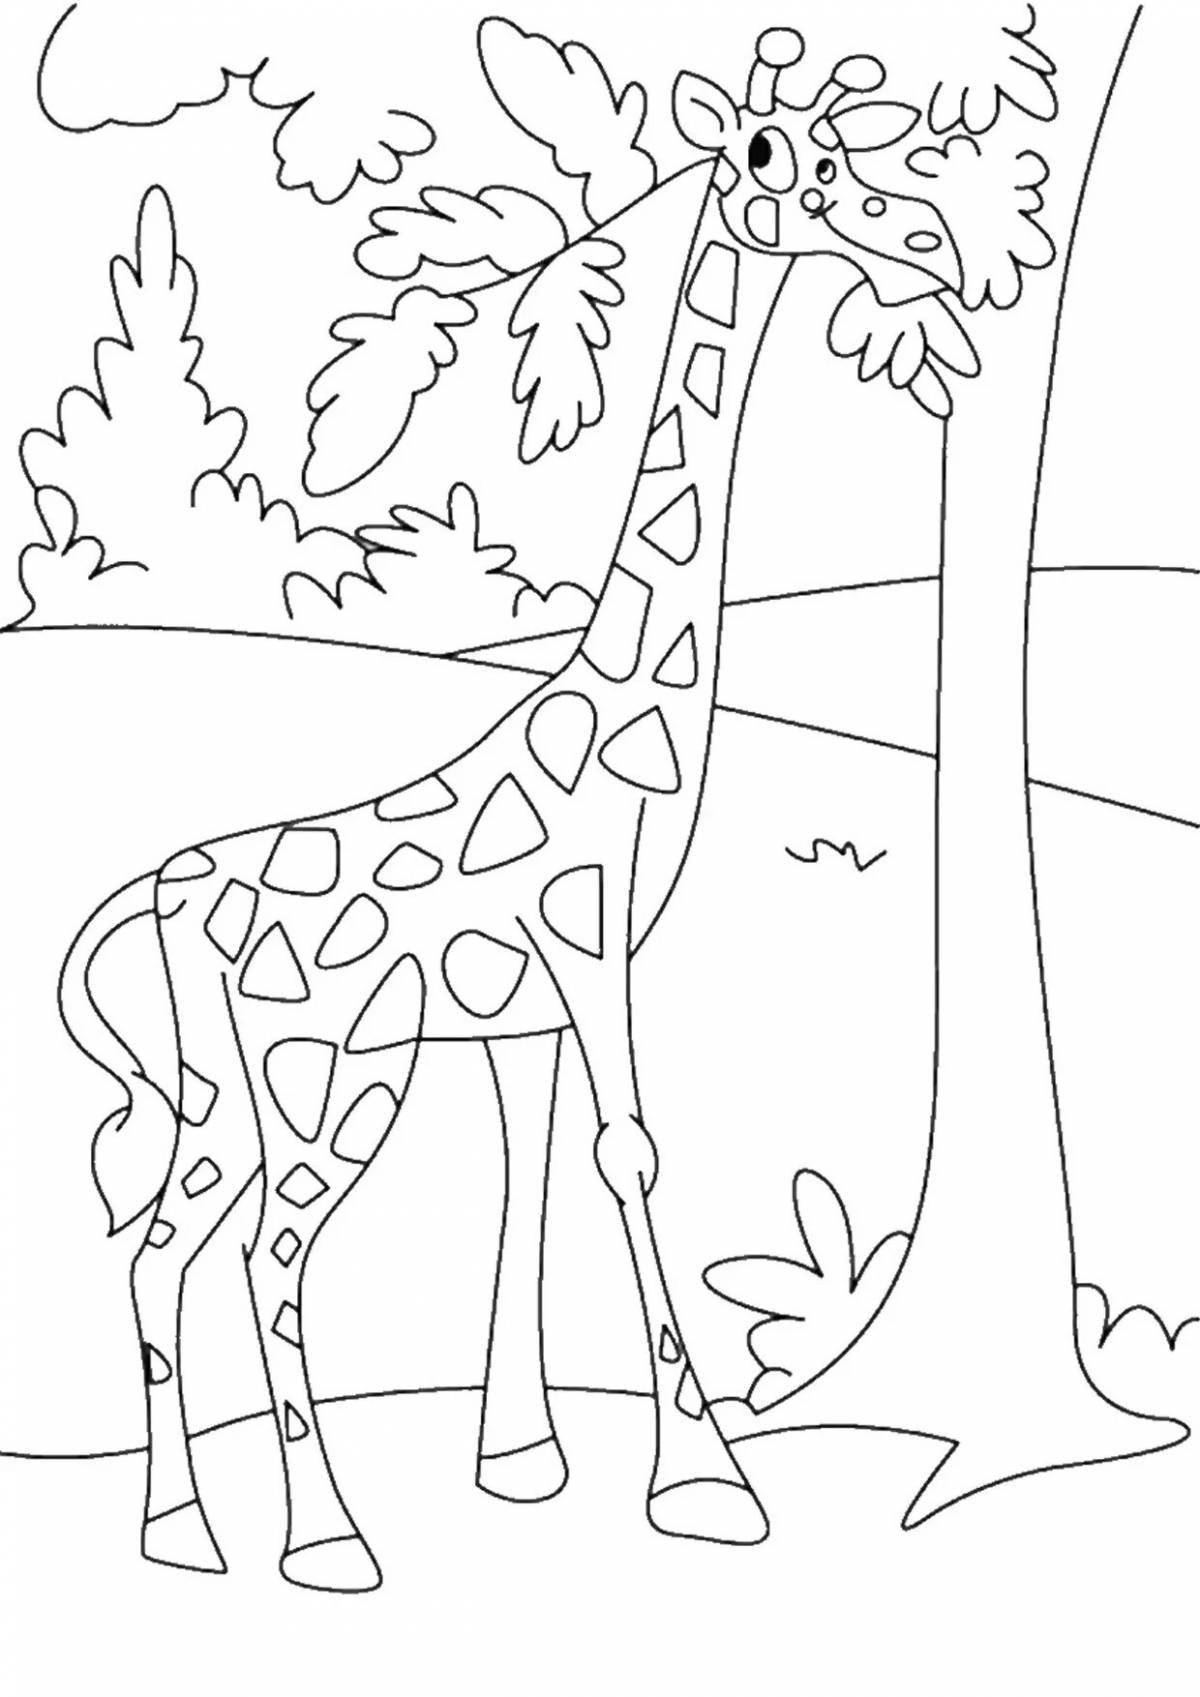 Glowing Giraffe Coloring Page for Babies